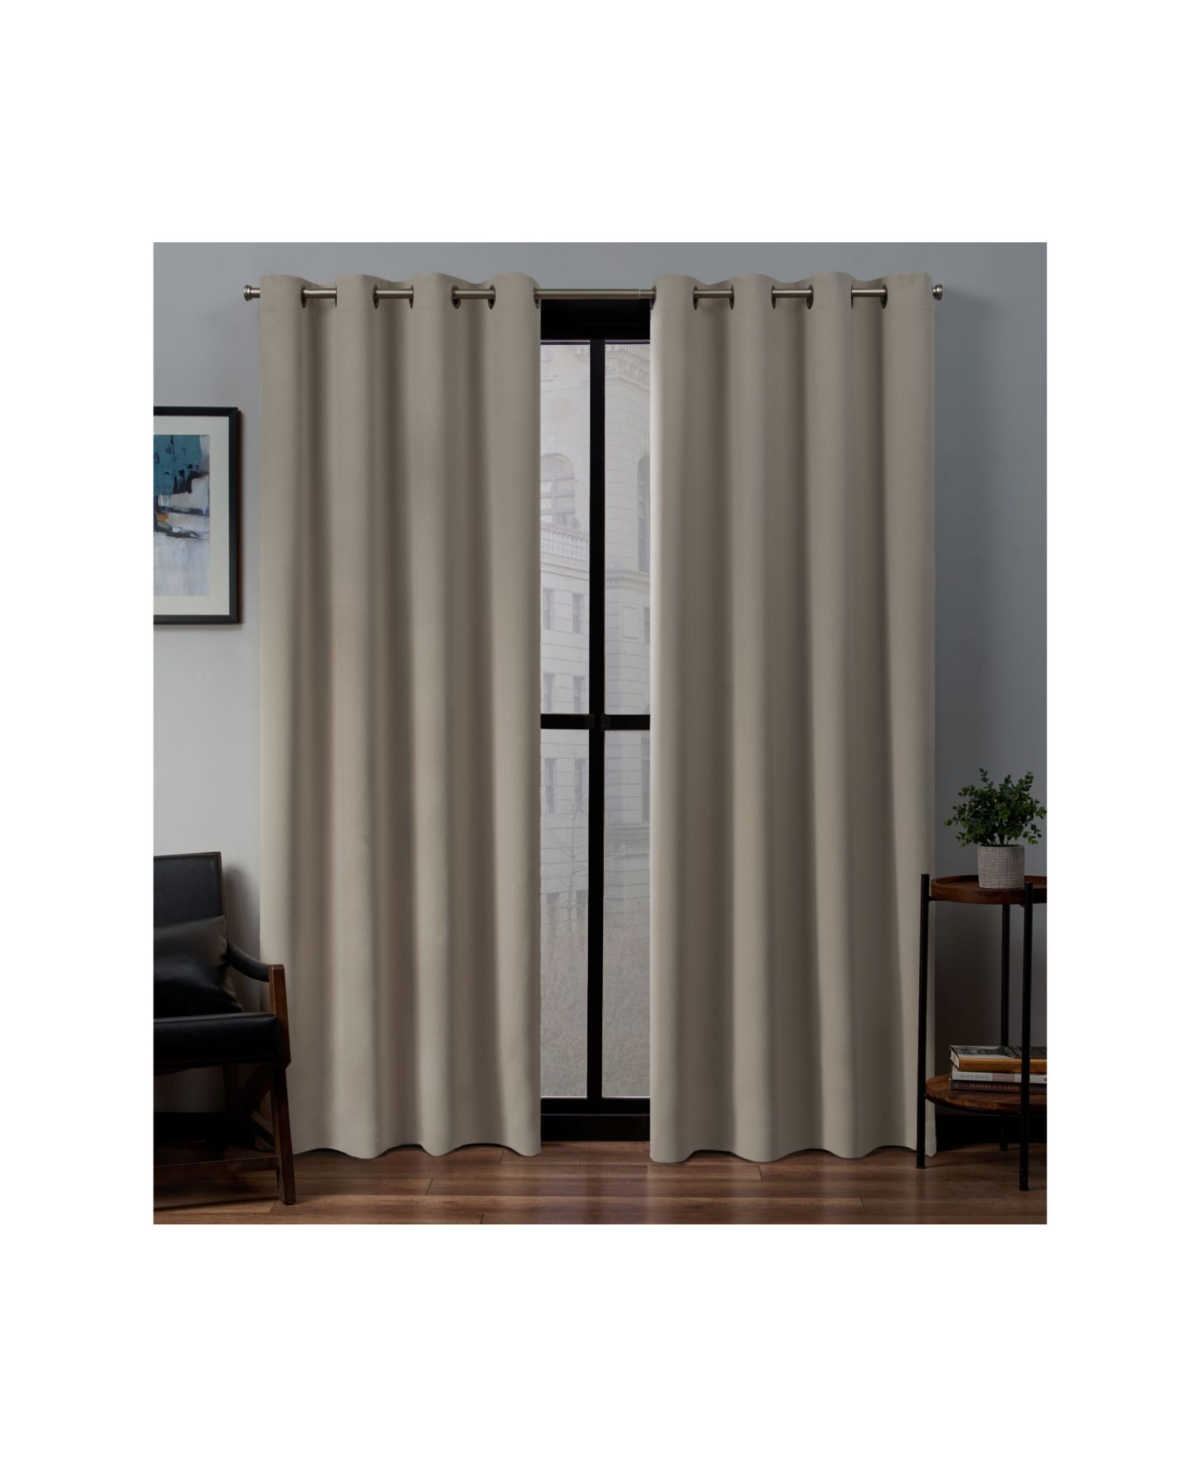 Sateen Twill Woven Blackout Grommet Top Curtain Panel Pair, 52" x 108" - Brown